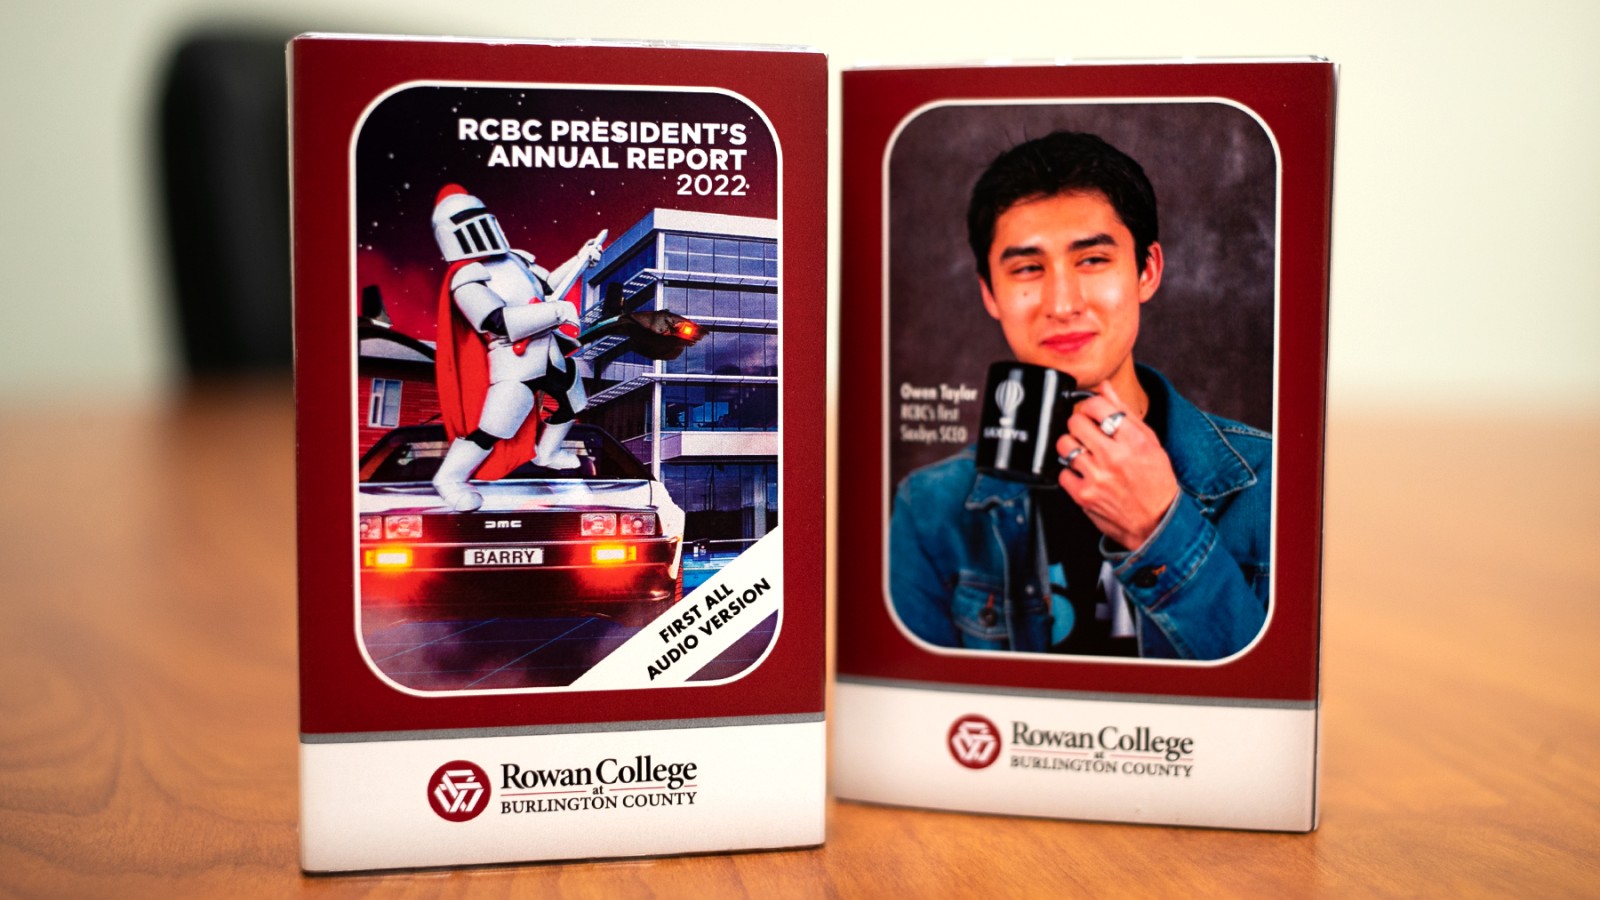 Image of audio cassette packaging. Front shows Barry the mascot. Back shows student Owen Taylor.